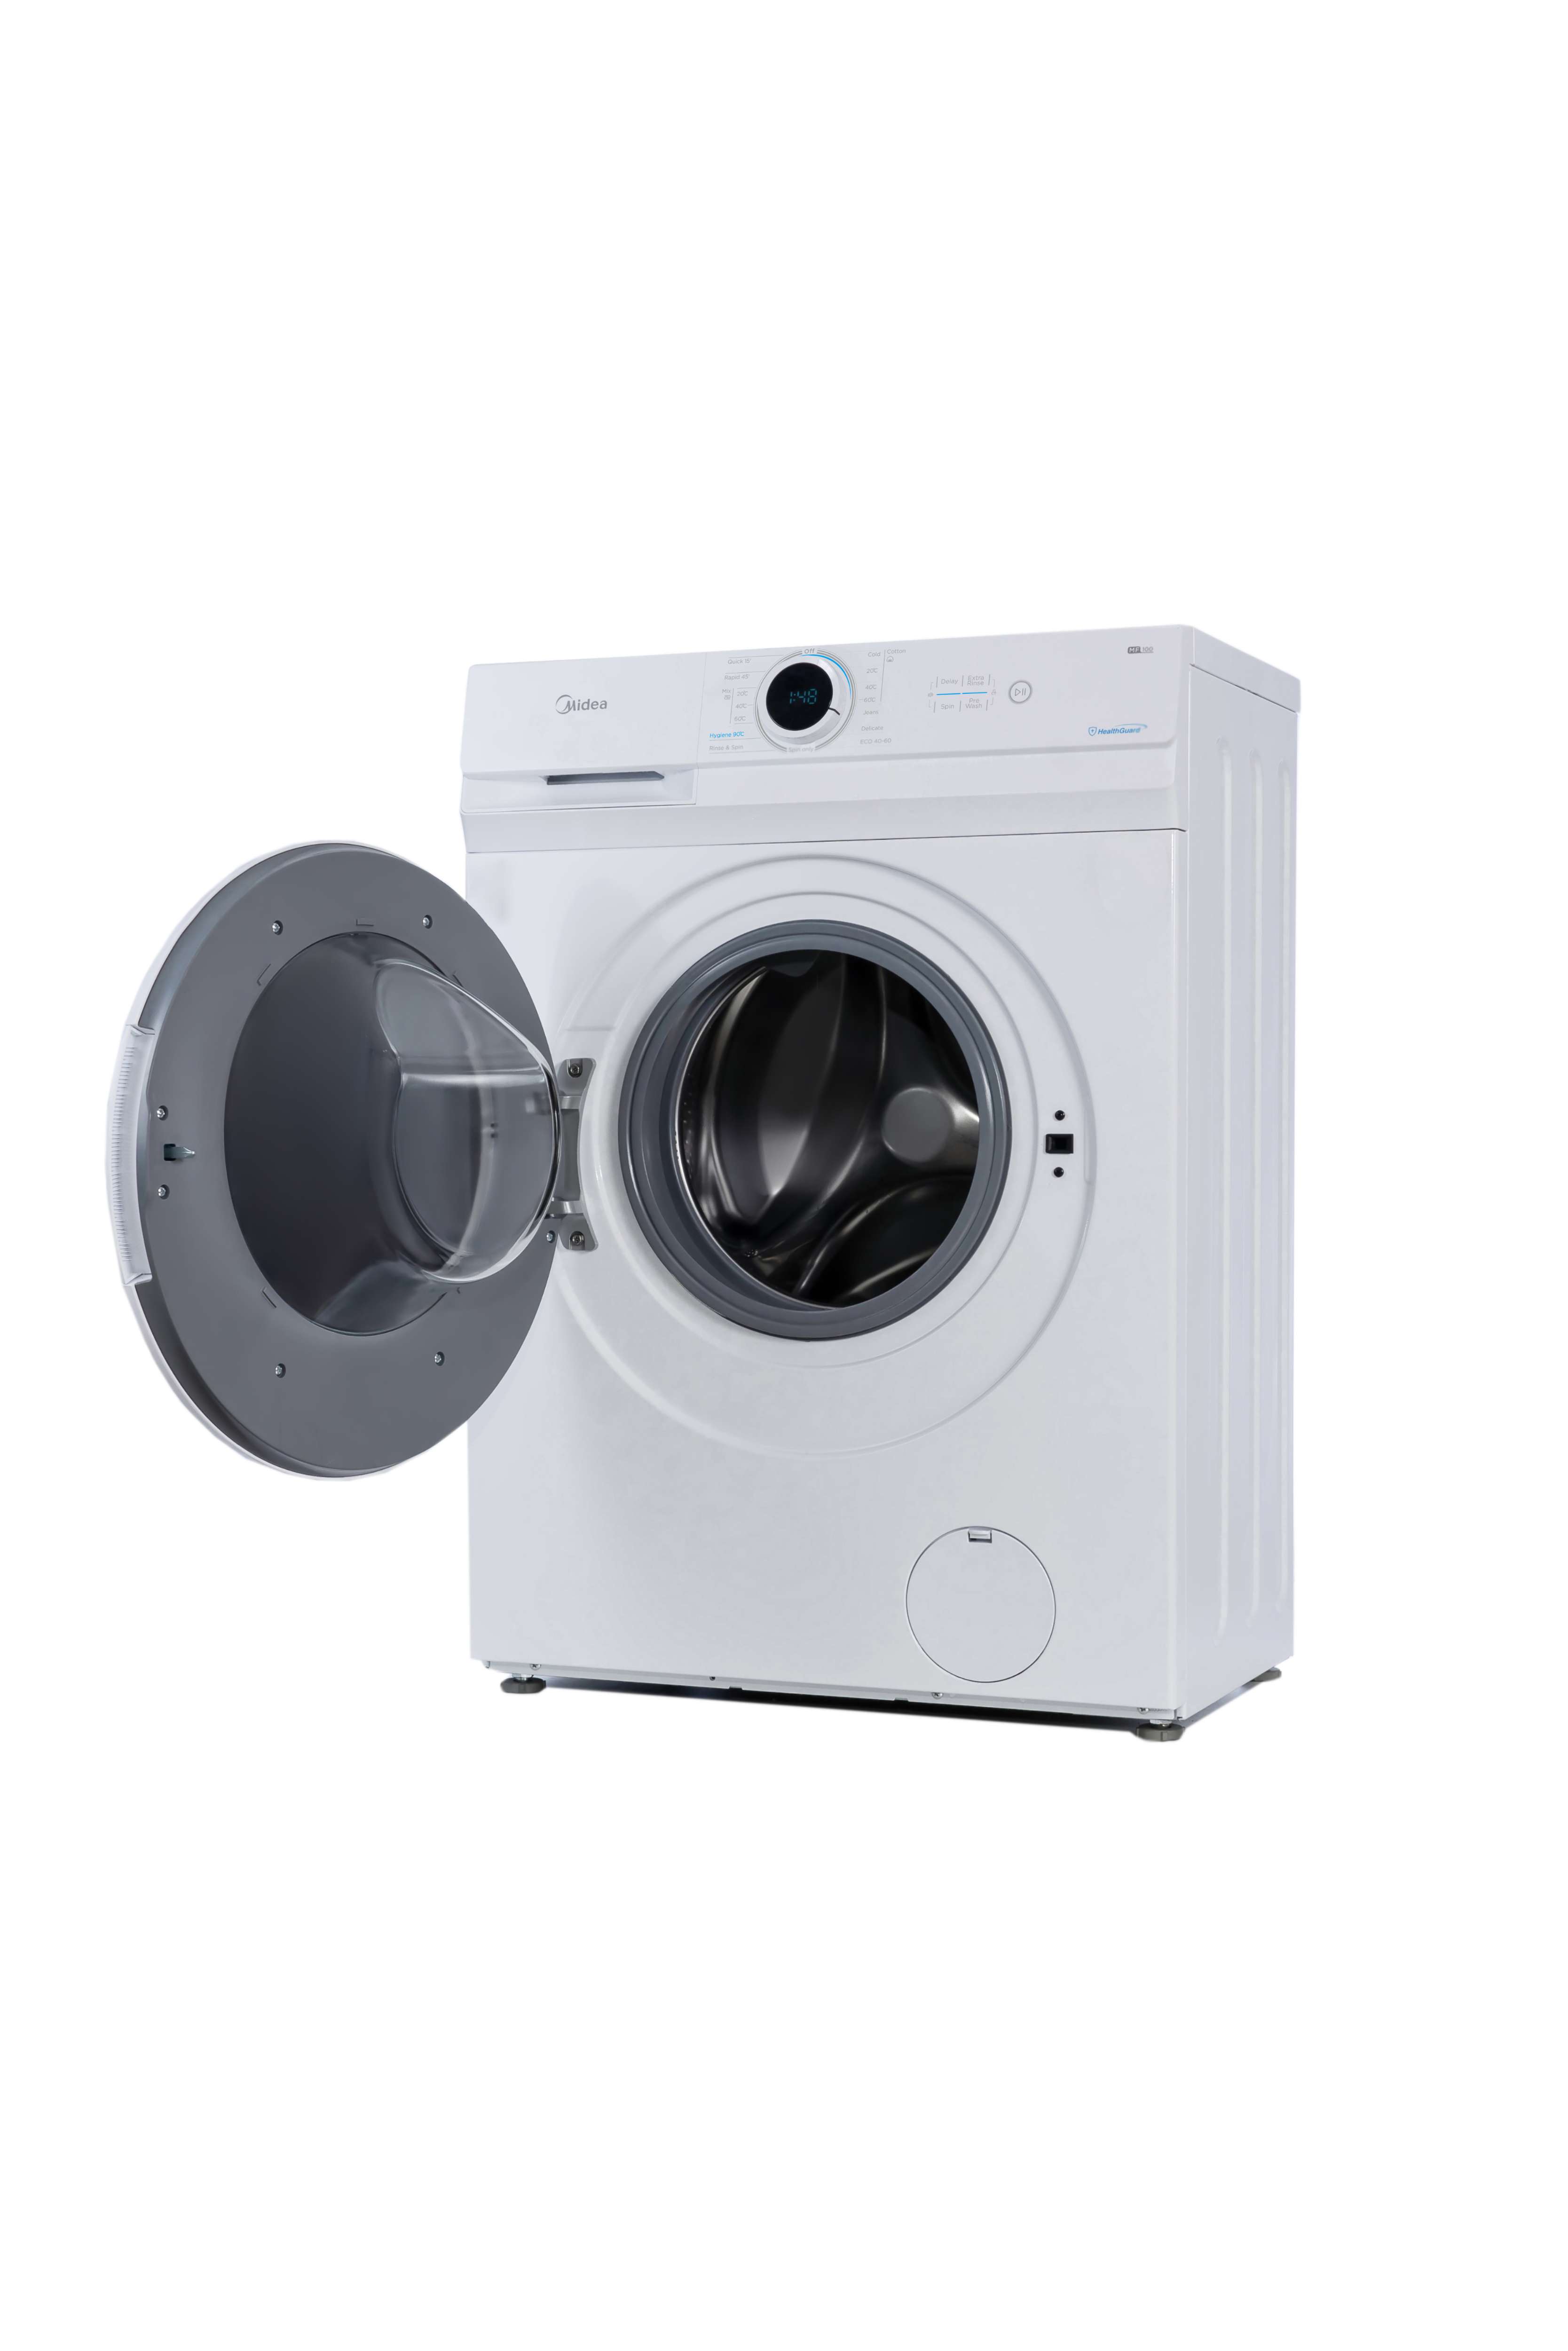 Midea MF100W70 Freestanding Washing Machine, Lunar Dial and LED Display,  1200 RPM, 7 kg Load, White [